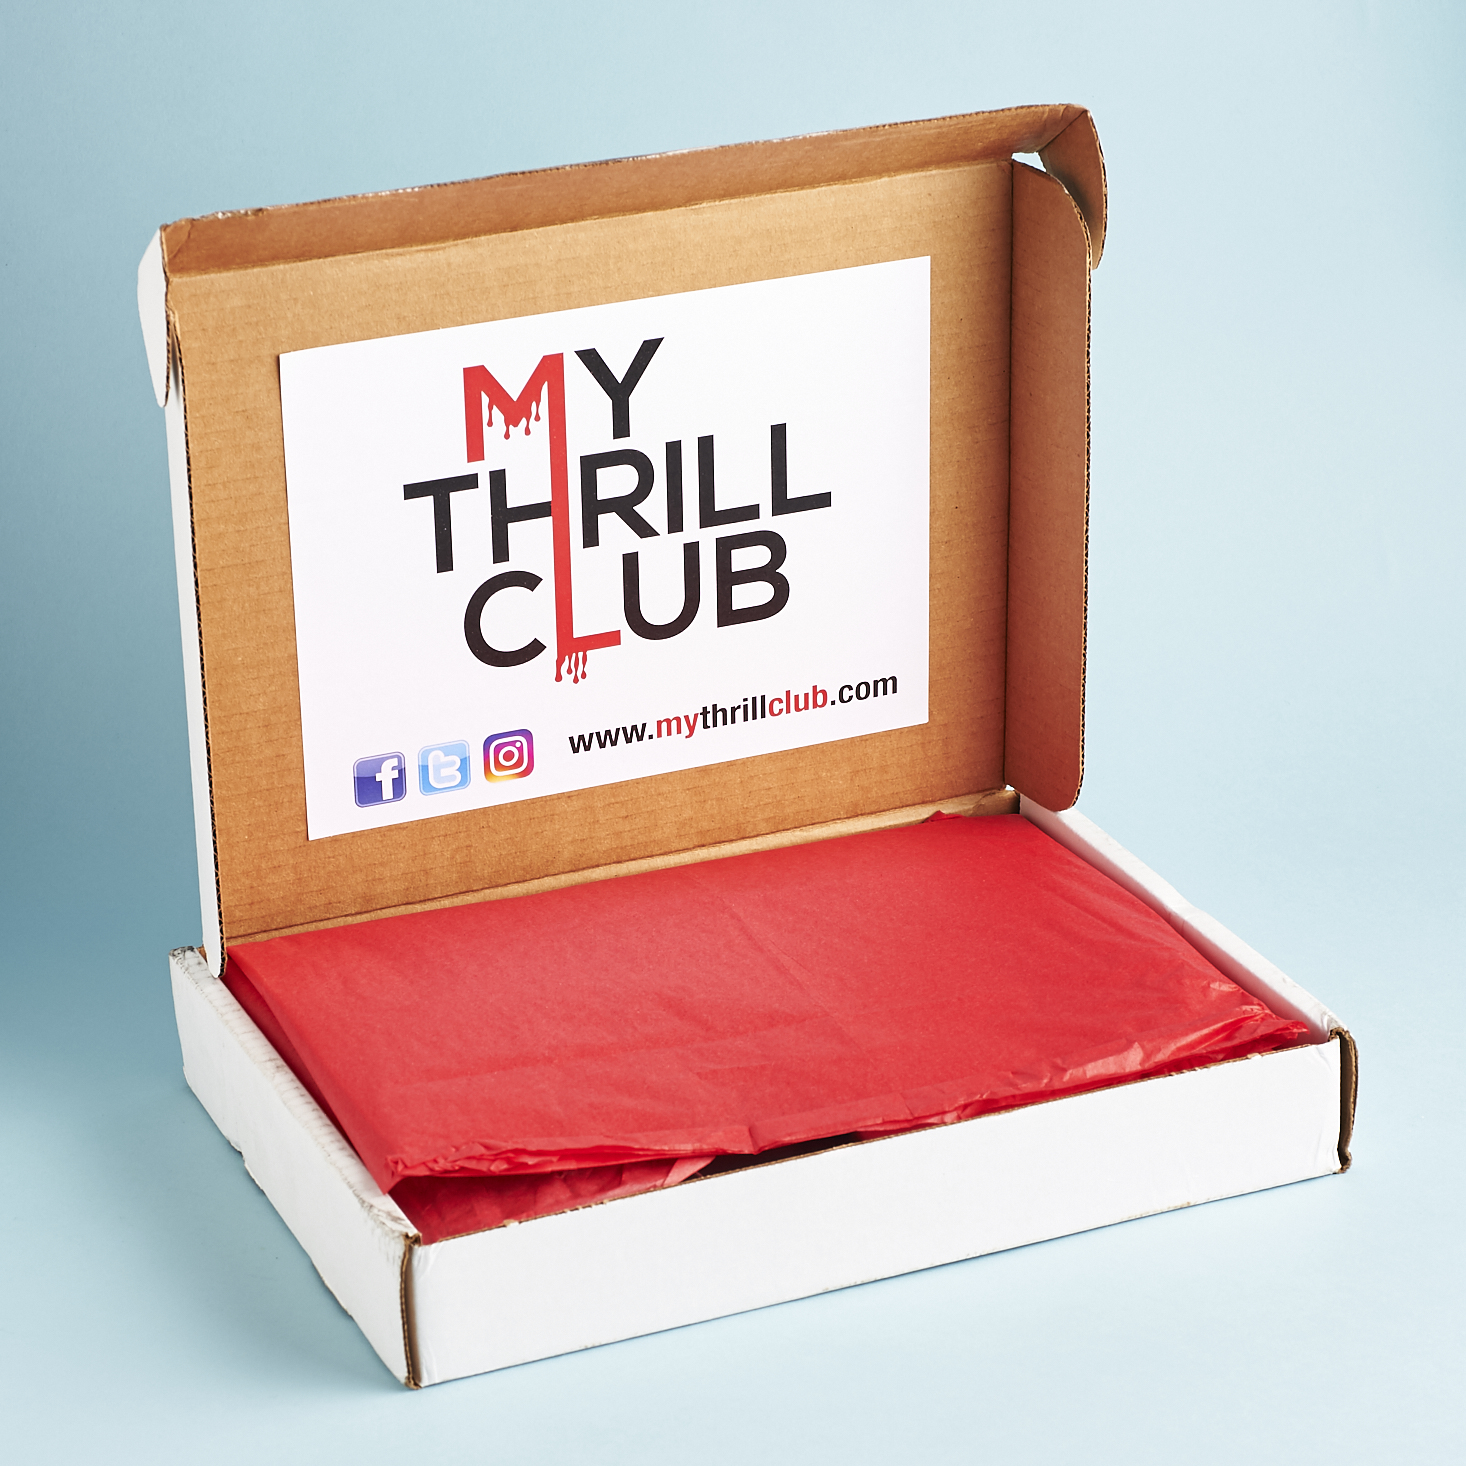 My Thrill Club Subscription Box Review – January 2017